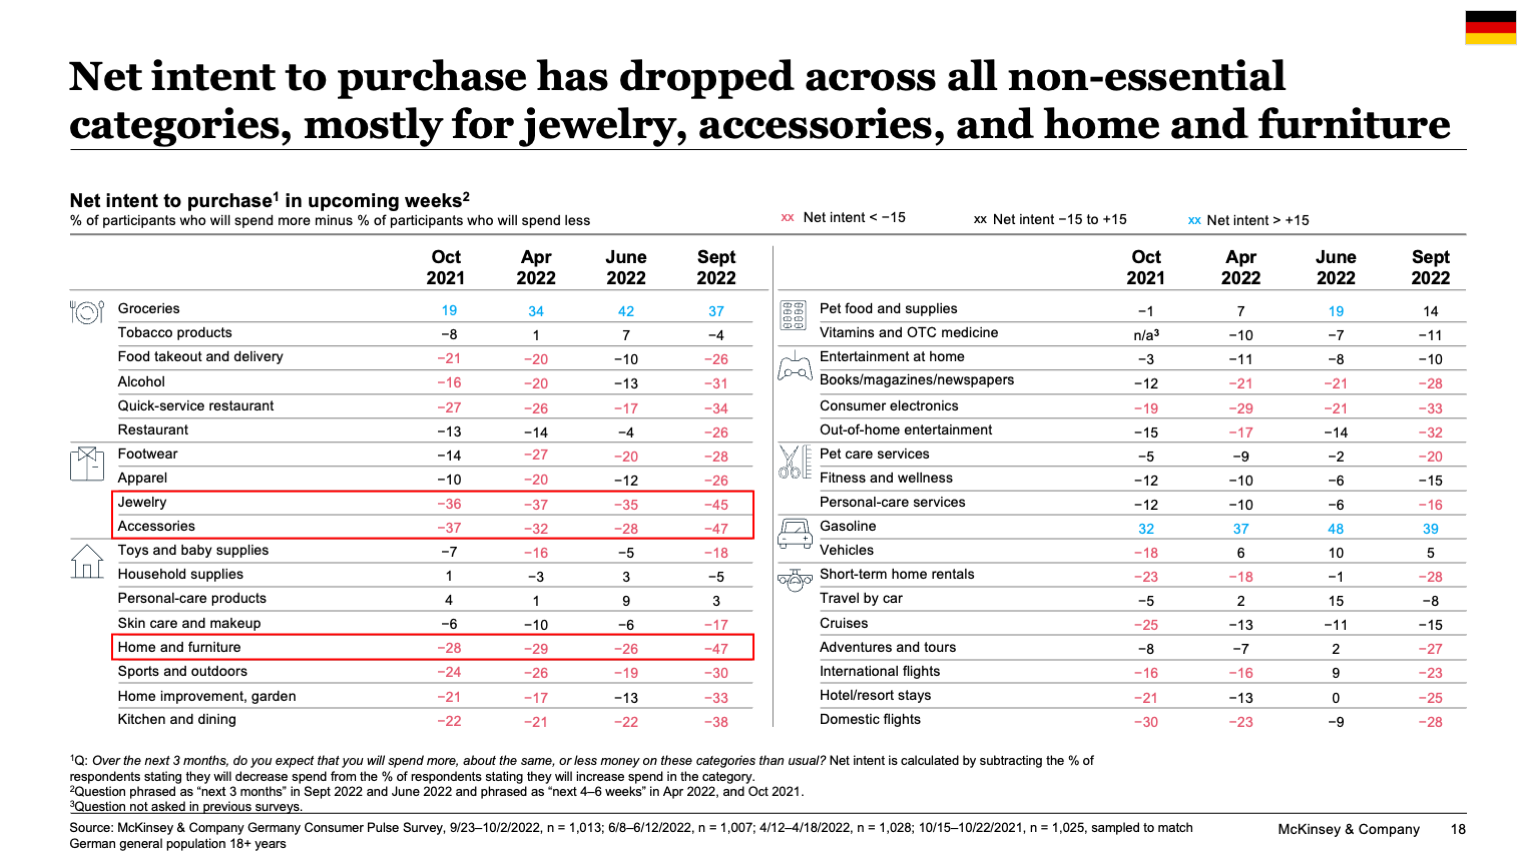 Net intent to purchase has dropped across all non-essential categories, mostly for jewelry, accessories, and home and furniture